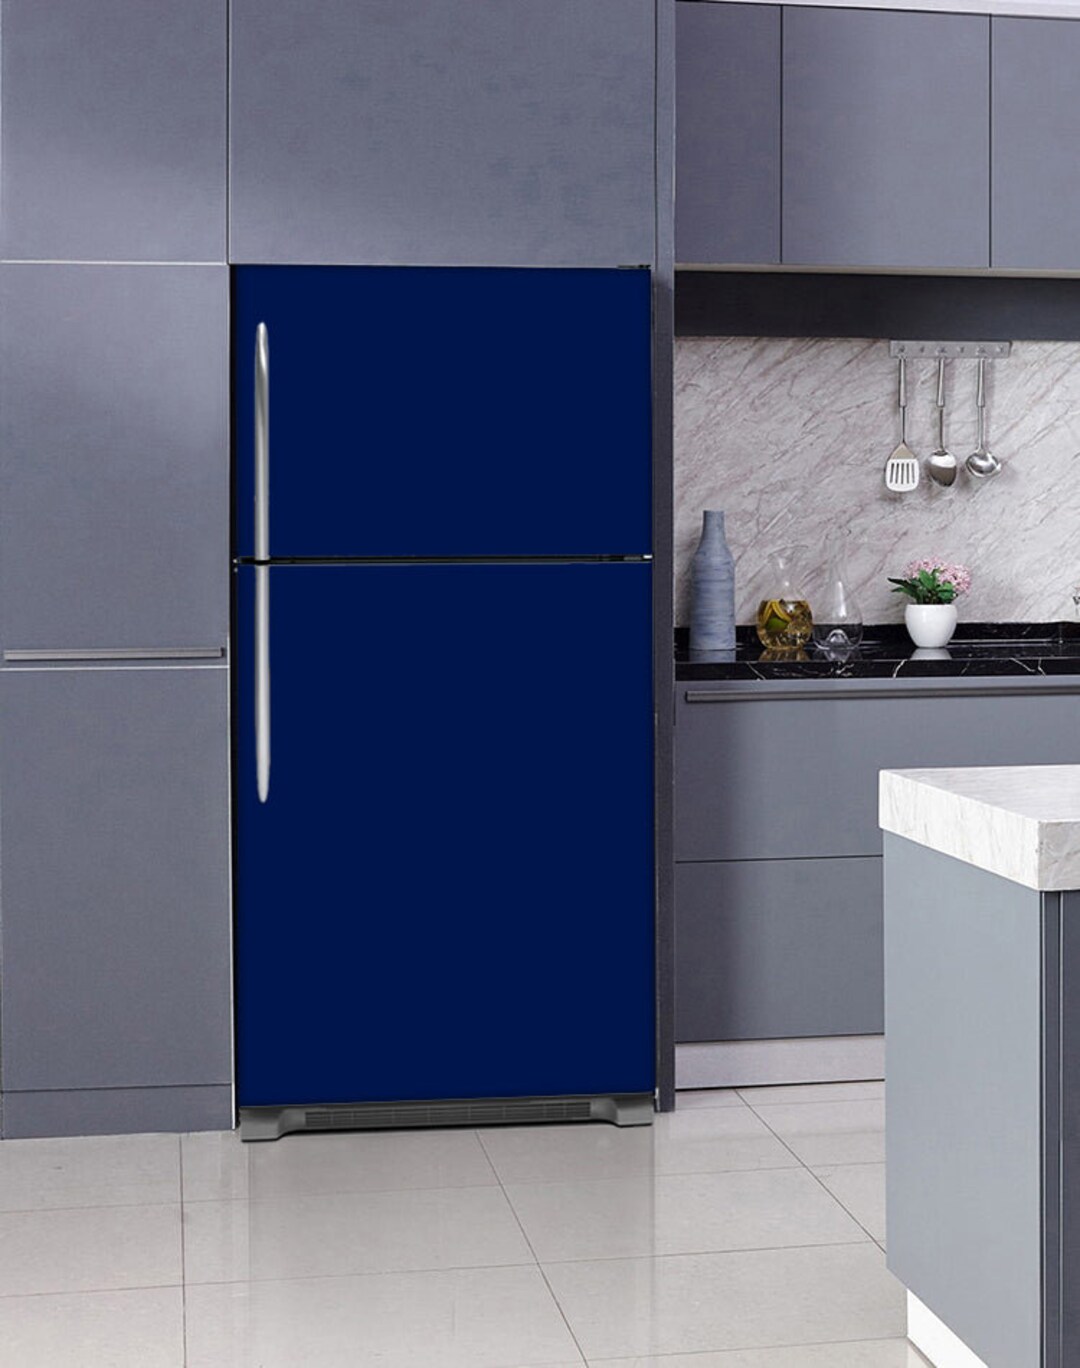 Midnight Blue Magnetic Refrigerator Cover Skin Panel Wrap - Etsy